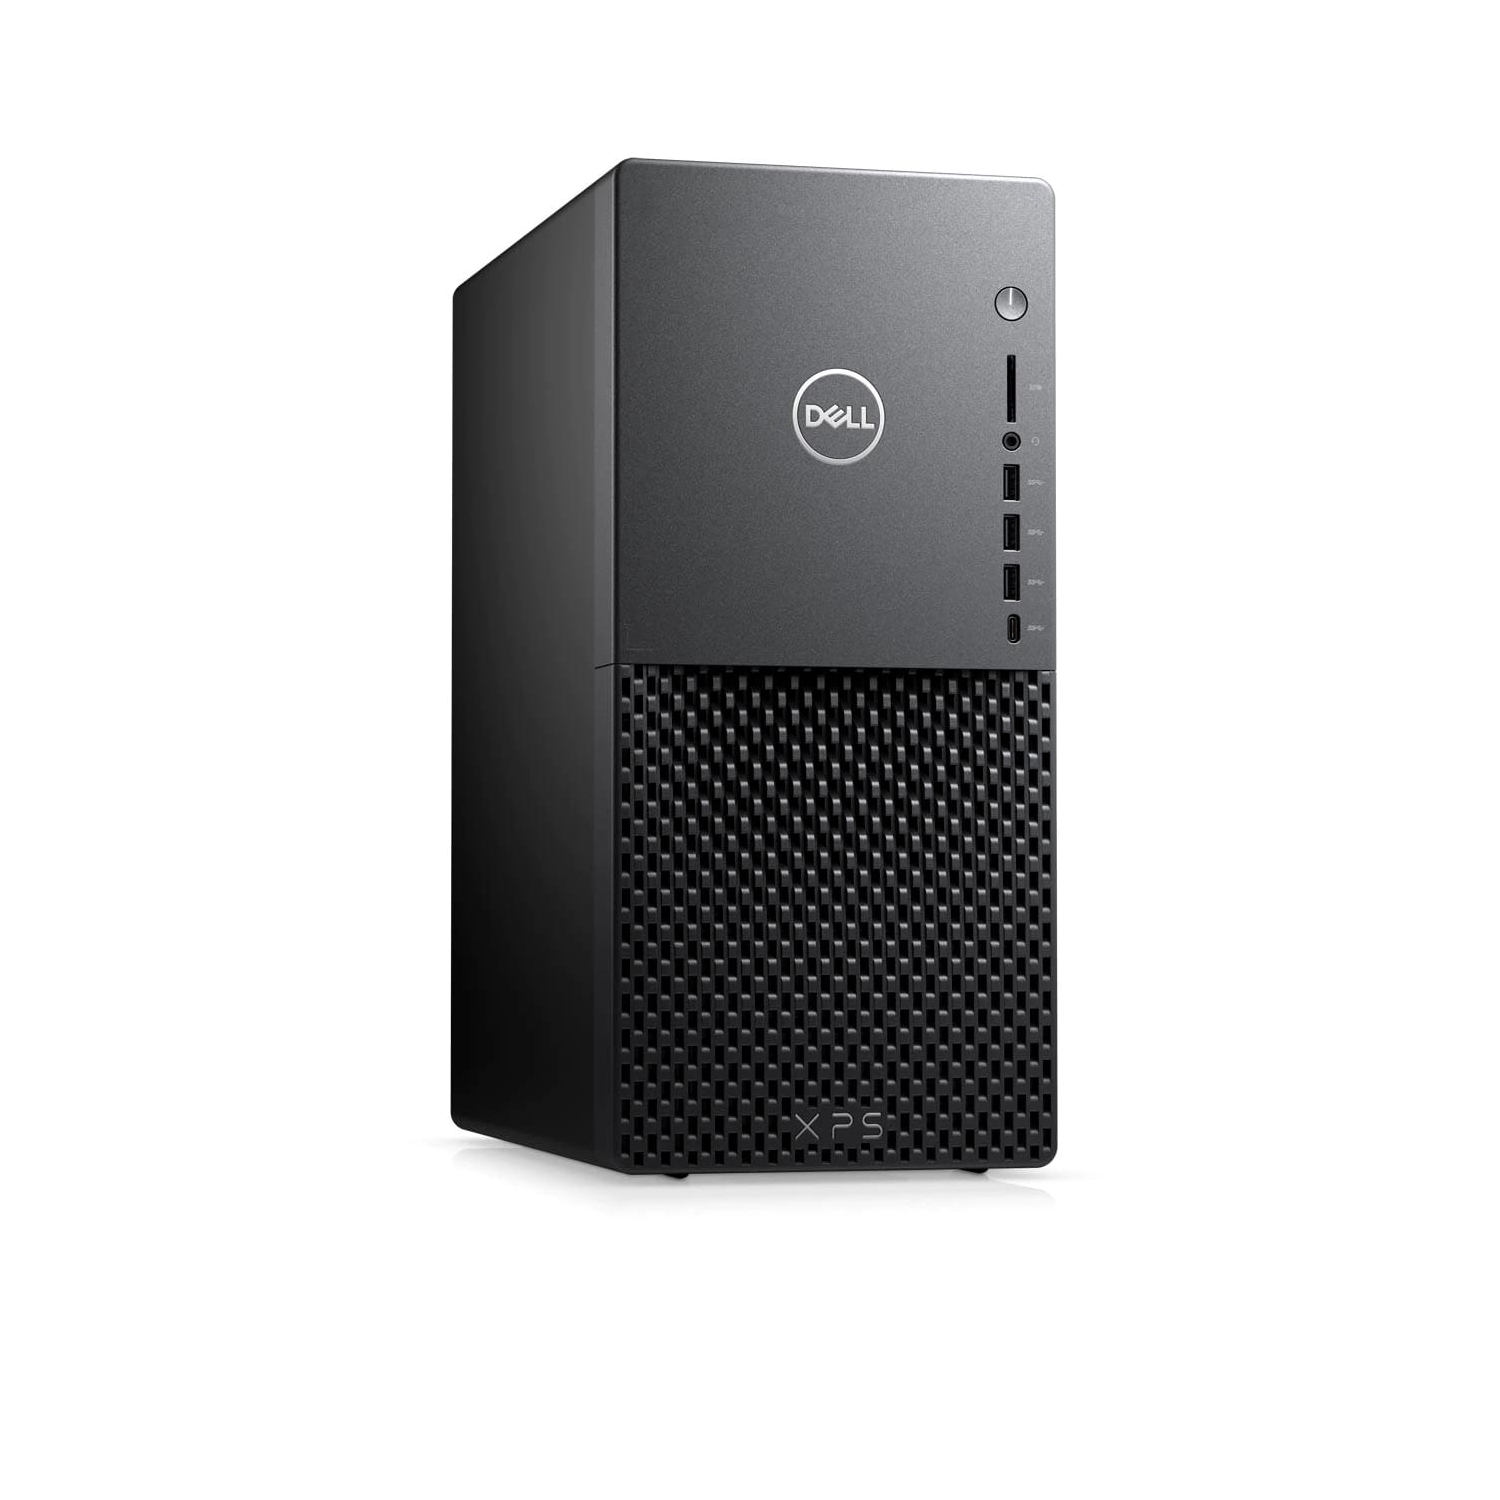 Refurbished (Excellent) - Dell XPS 8940 Desktop (2020) | Core i7 - 2TB HDD + 512GB SSD - 16GB RAM - RTX 3070 | 8 Cores @ 4.9 GHz - 11th Gen CPU Certified Refurbished